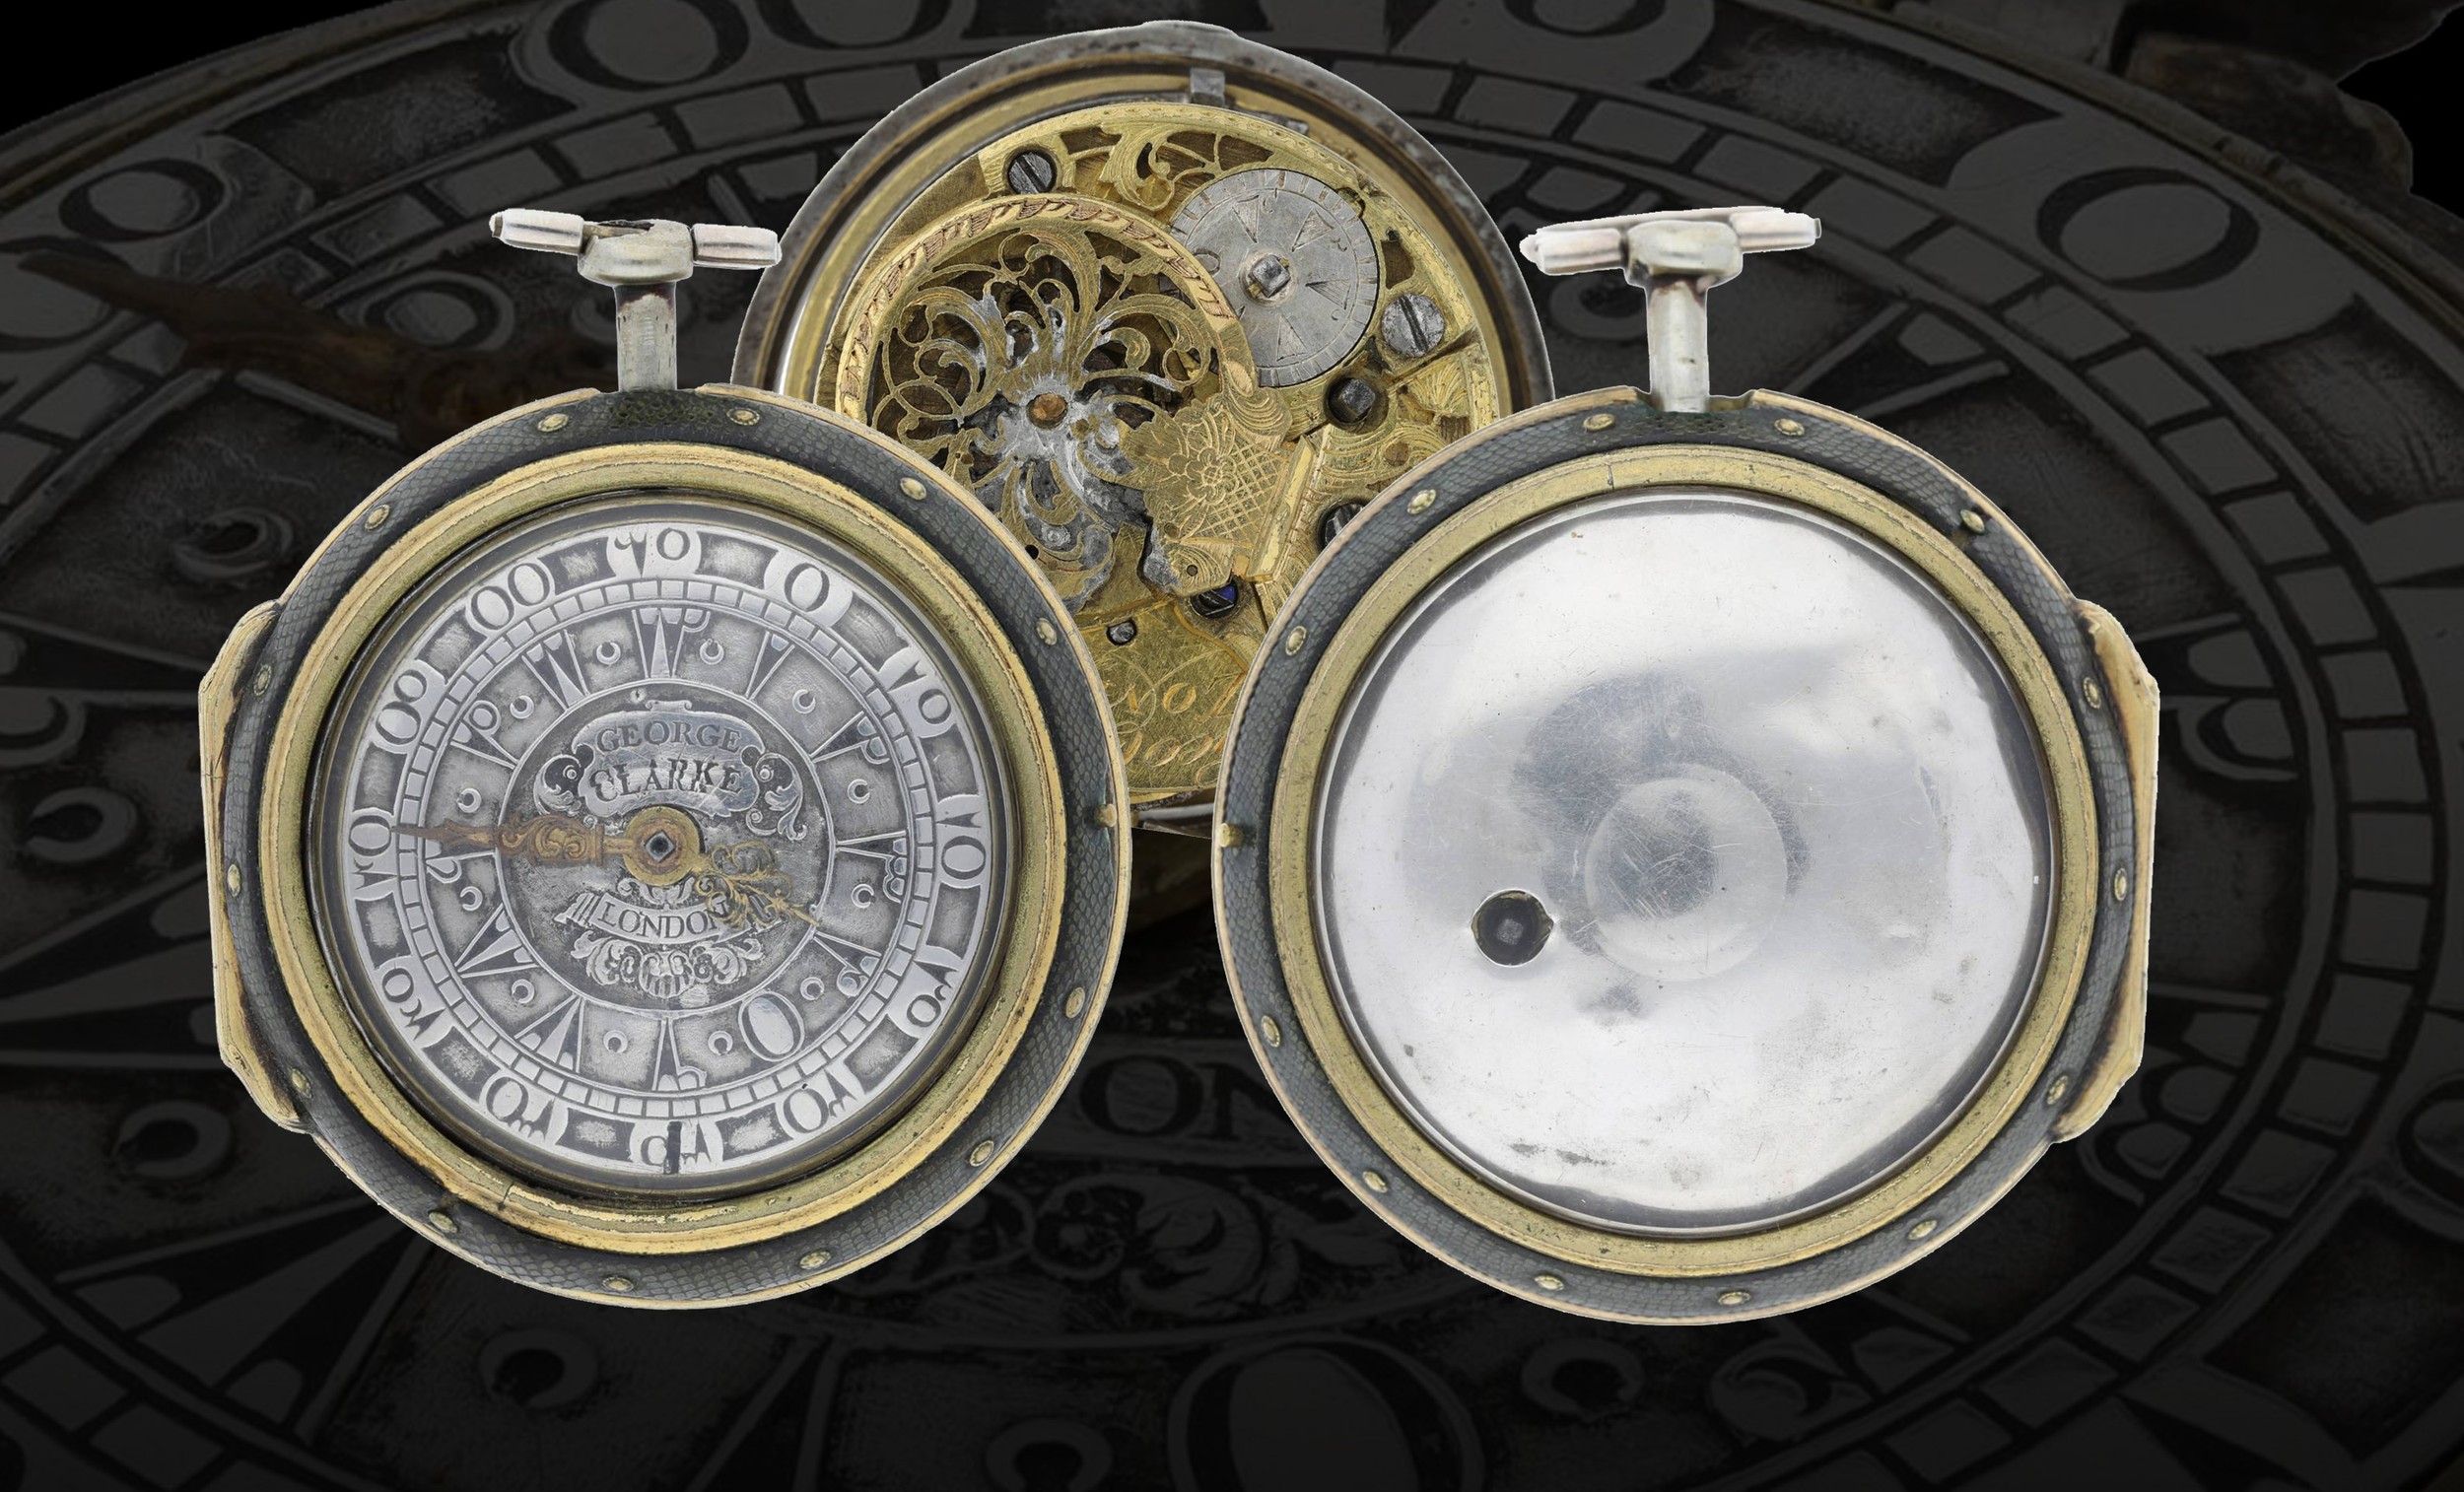 George Clarke, London - mid-18th century silver pair cased verge pocket watch made for the Turkish